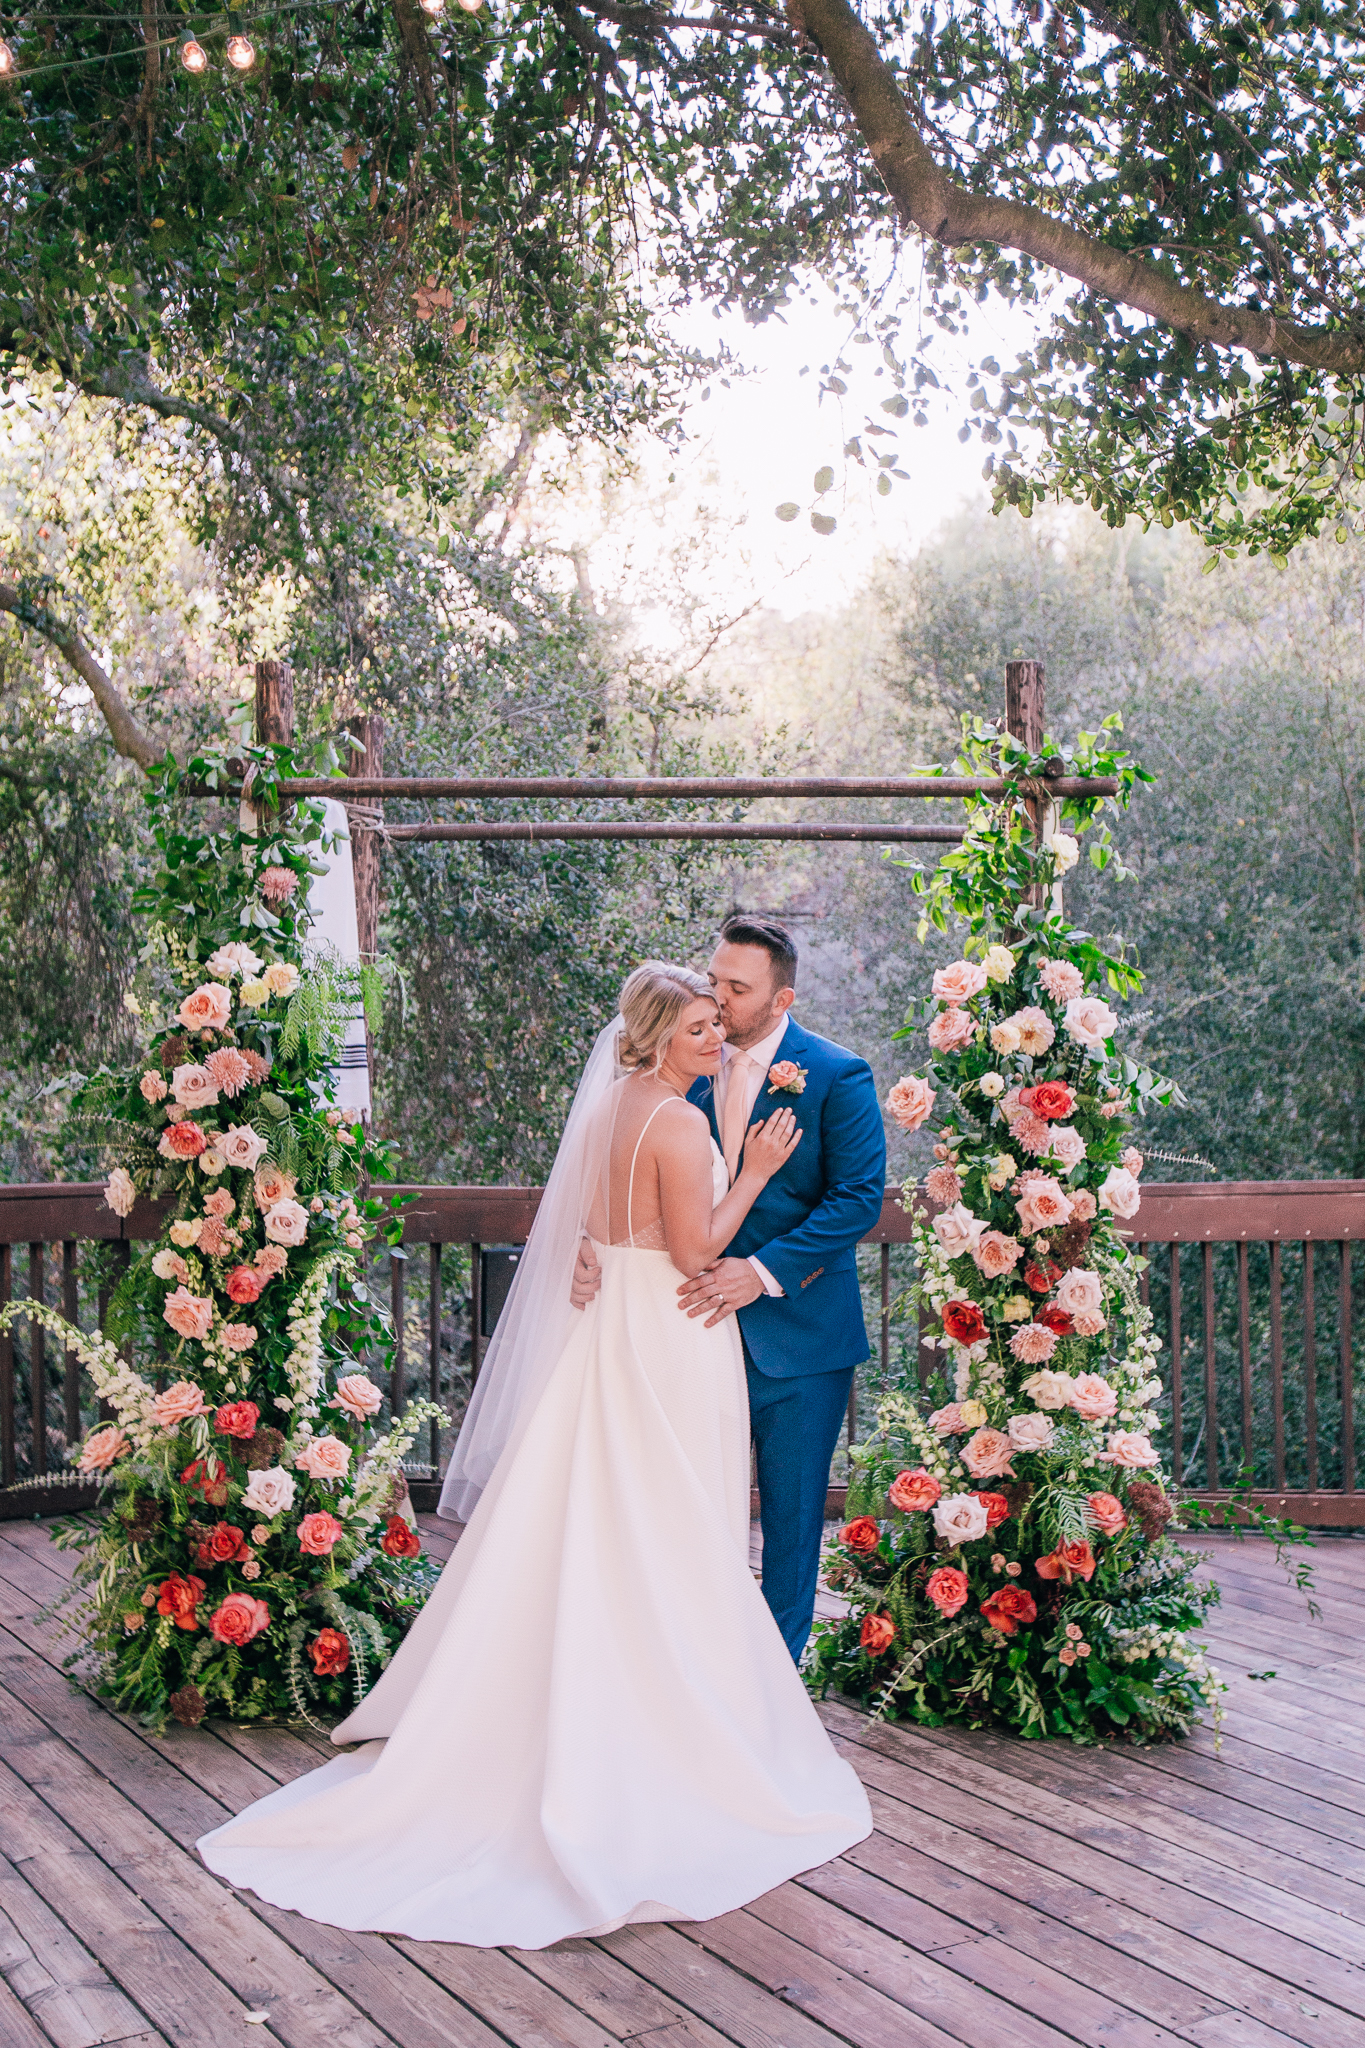 bride in spaghetti strap wedding dress stands with groom in blue suit and light pink tie in front of their wedding ceremony arch with bright florals